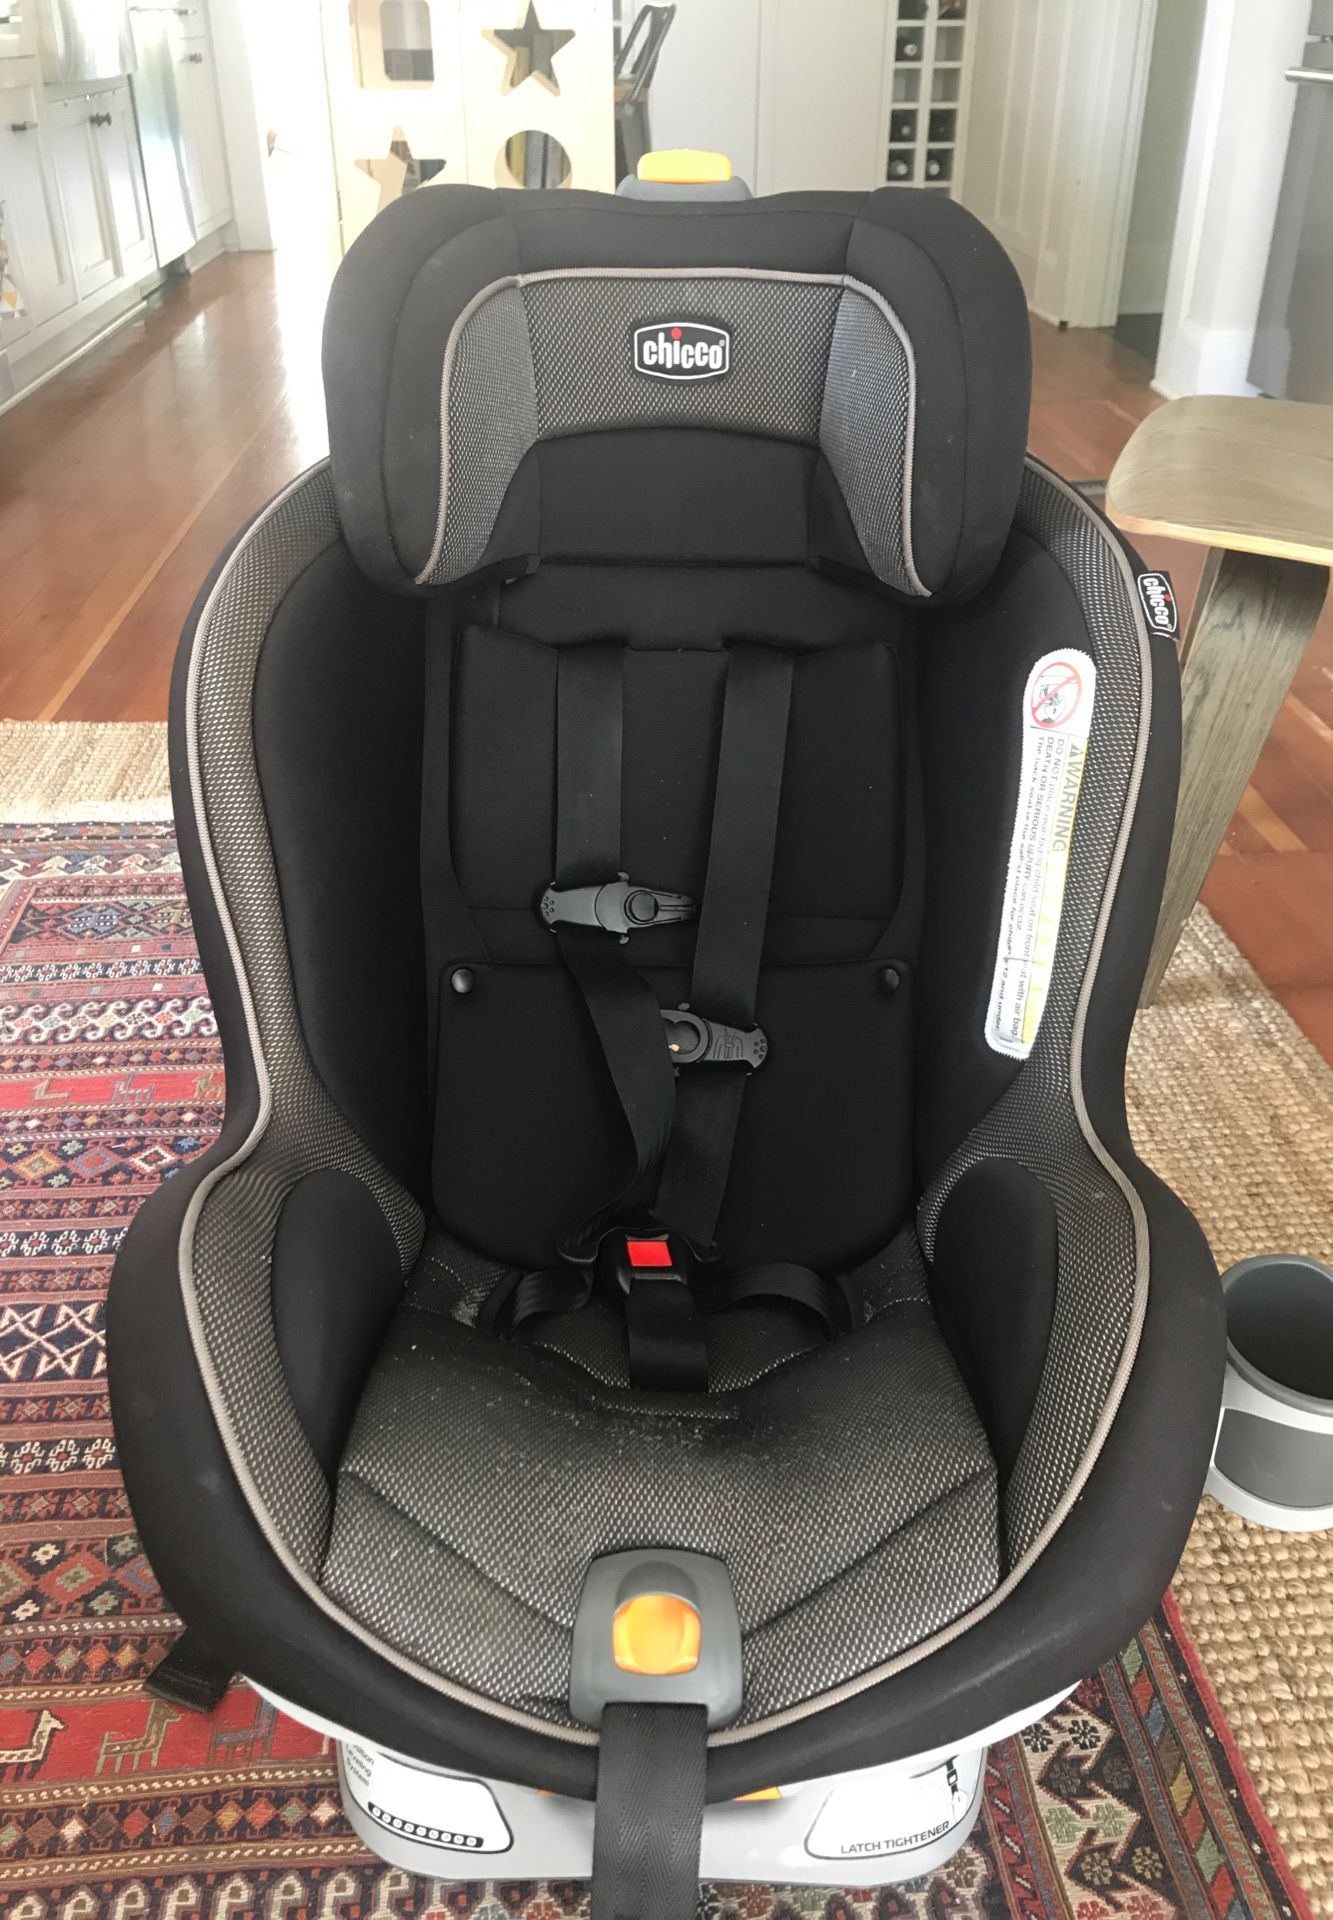 Chicco key fit 30 infant car seat